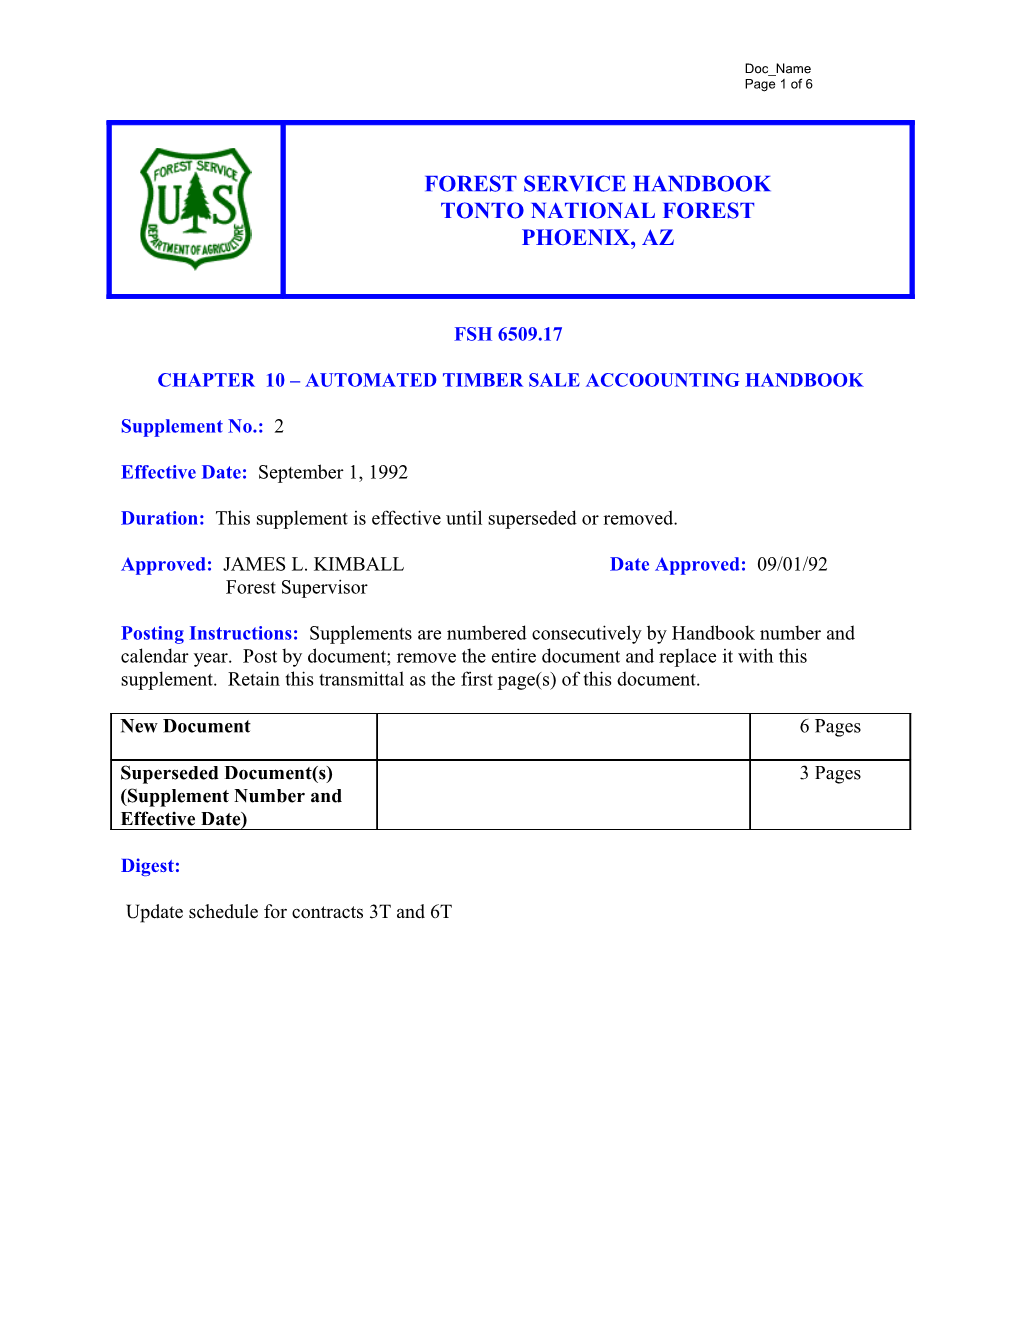 Chapter 10 Automated Timber Sale Accoounting Handbook